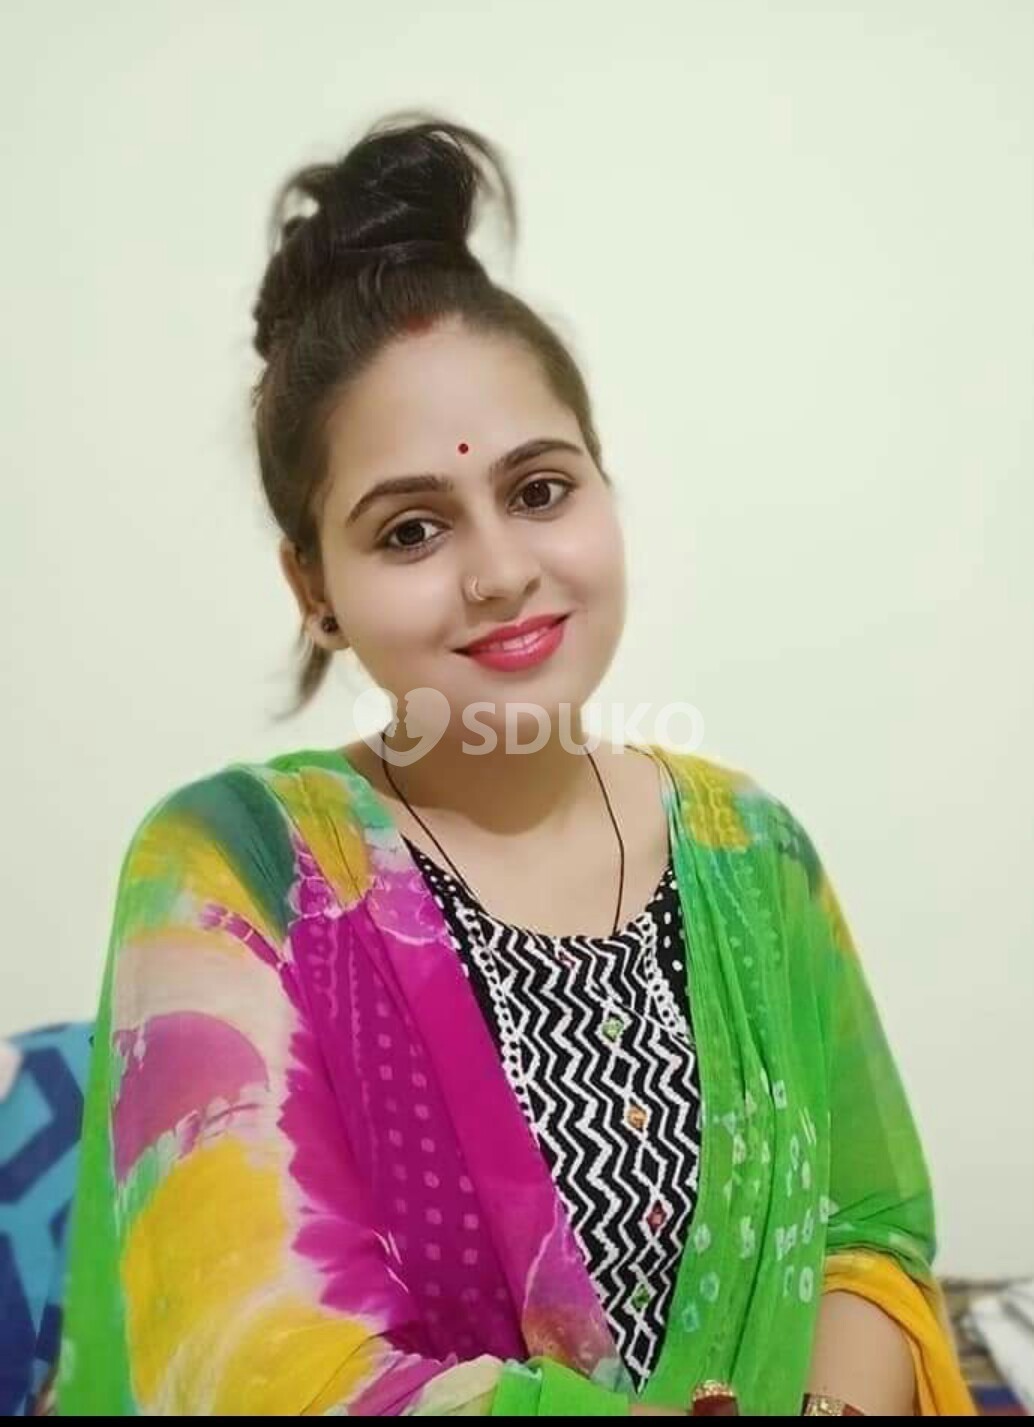 Hello Guys I am Pooja Wagholi low cost unlimited hard sex call girls service